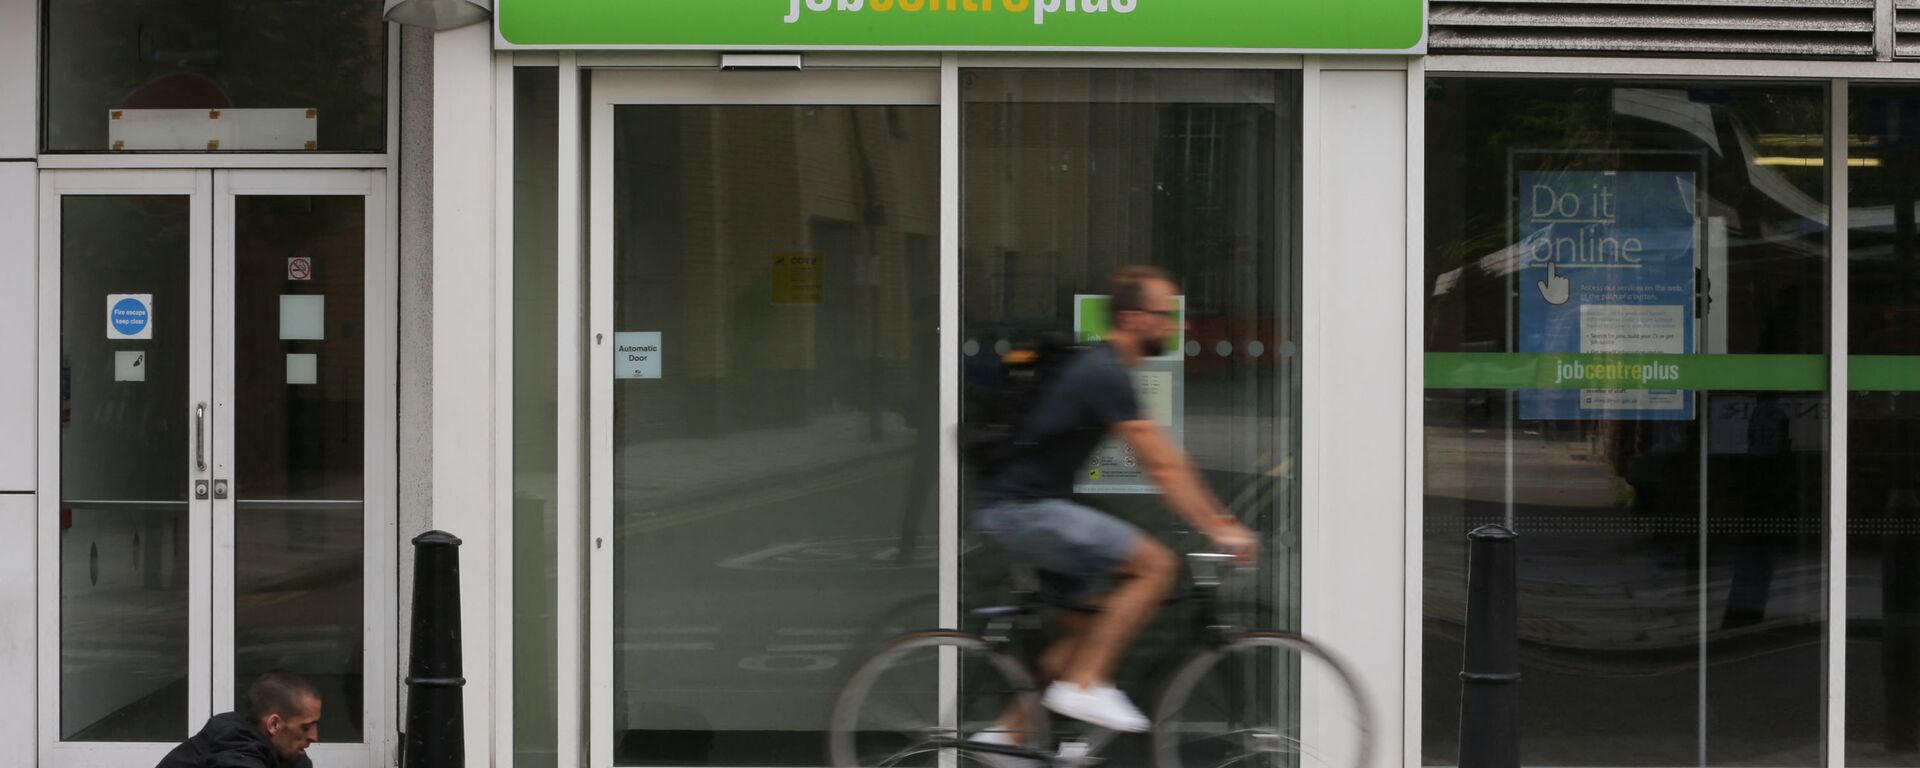 A cyclist passes the entrance to a job centre in east London on July 20, 2016 - Sputnik International, 1920, 30.09.2021